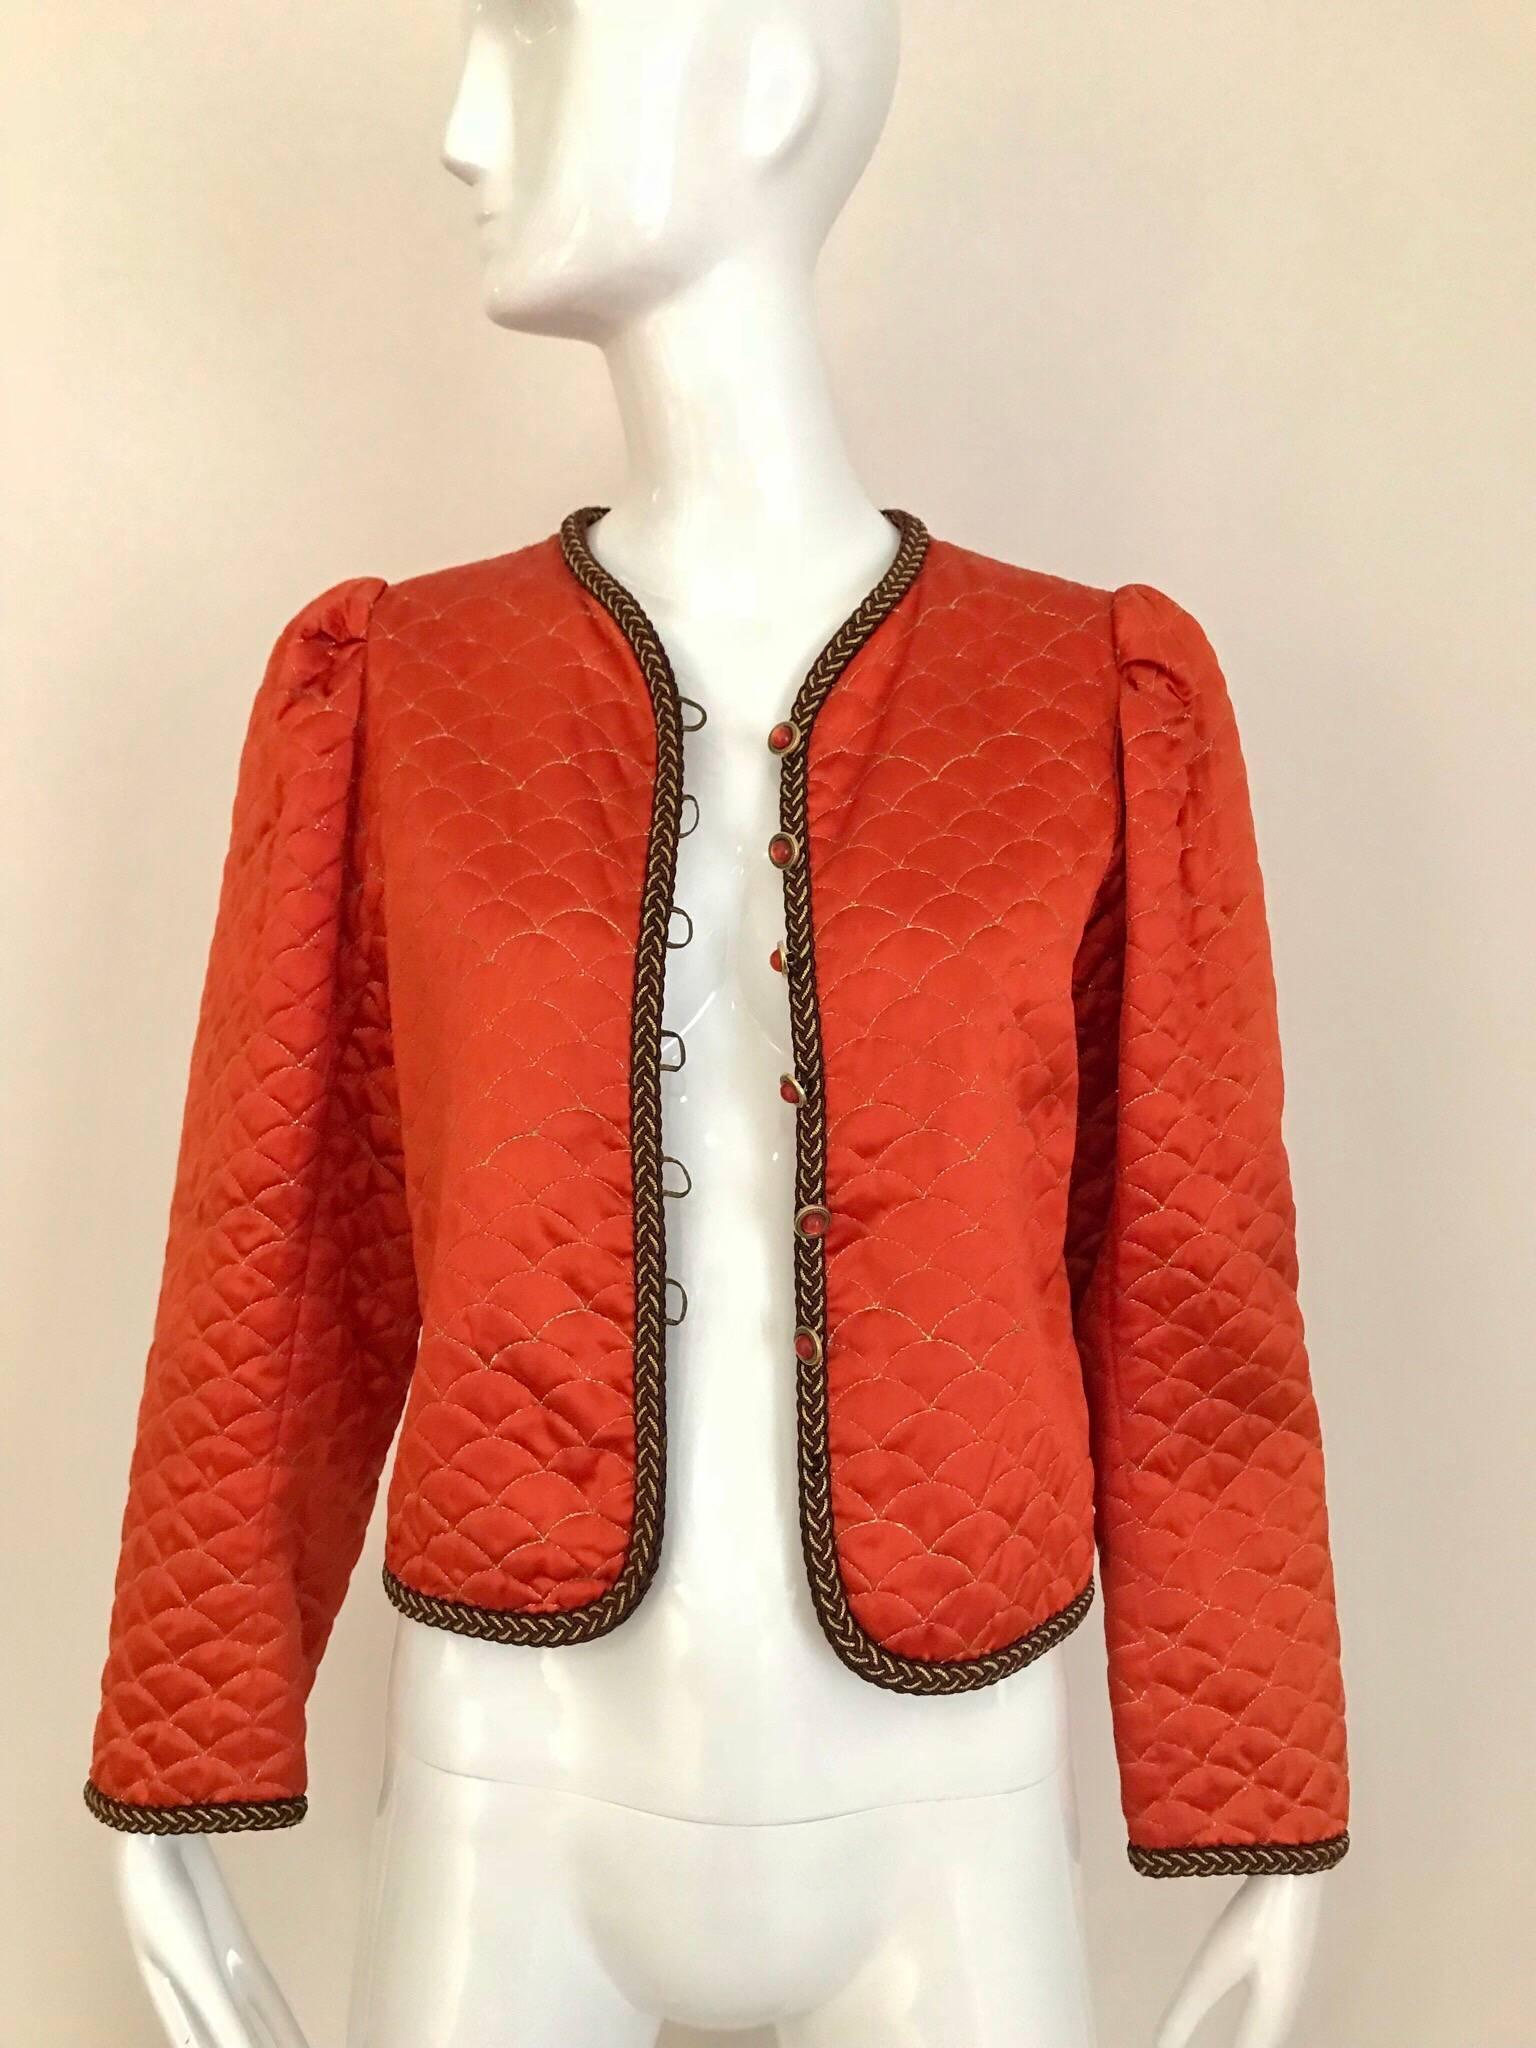 This 80's Mandarin orange silk Saint Laurent jacket is simple but chic! The clam-shell quilted motif is stitched with gold thread and contrasts the Mandarin orange silk fabric very nicely.  The woven braided gold trim is a special touch on this